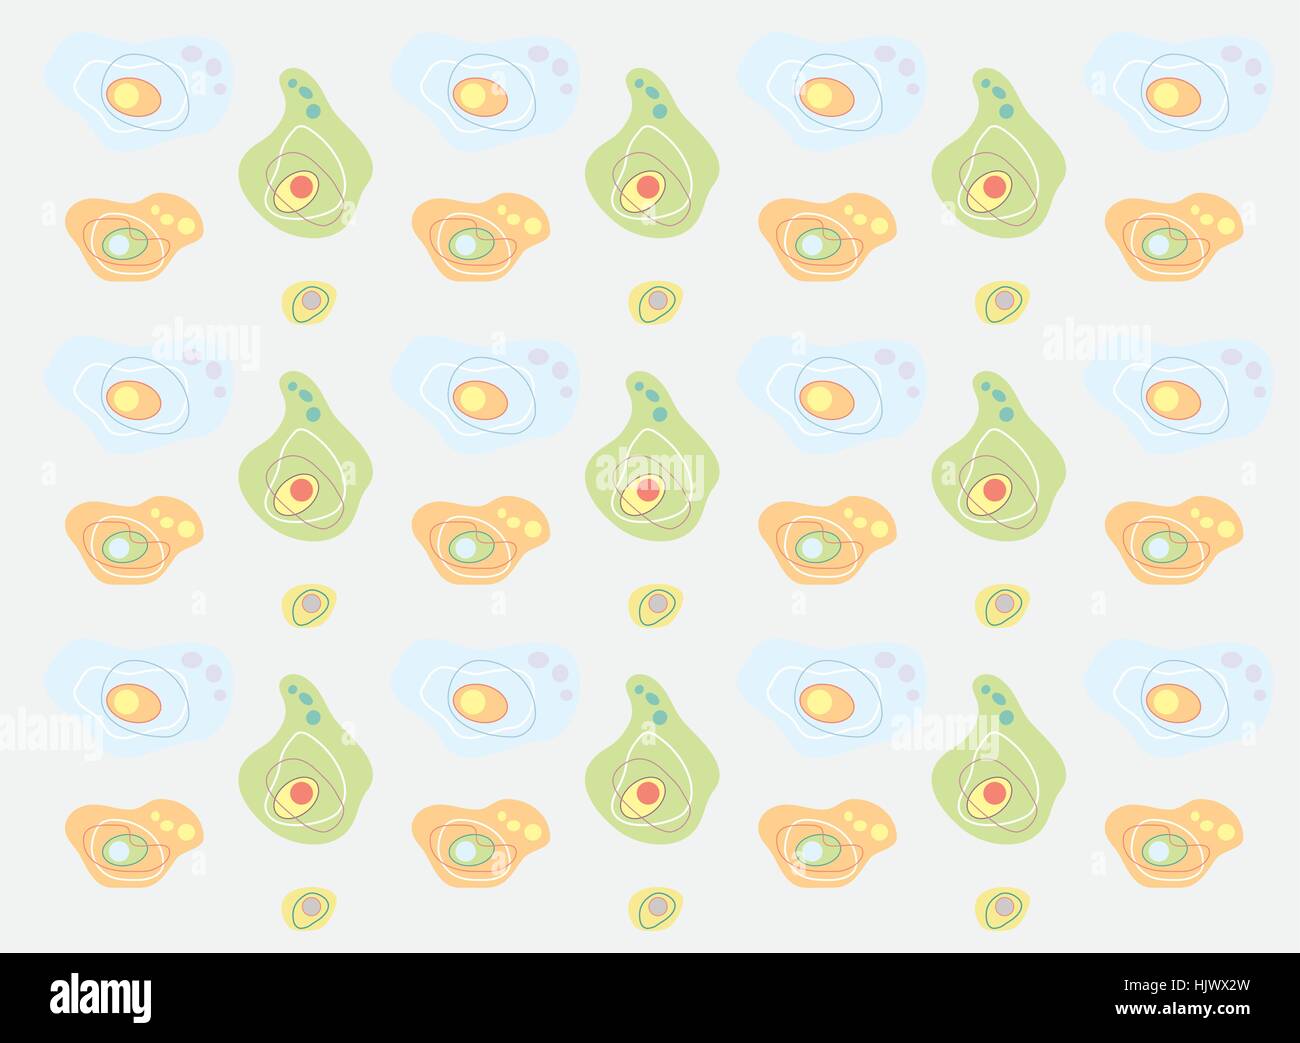 Wallpaper patterns and fabric patterns as vector graphic. Stock Vector